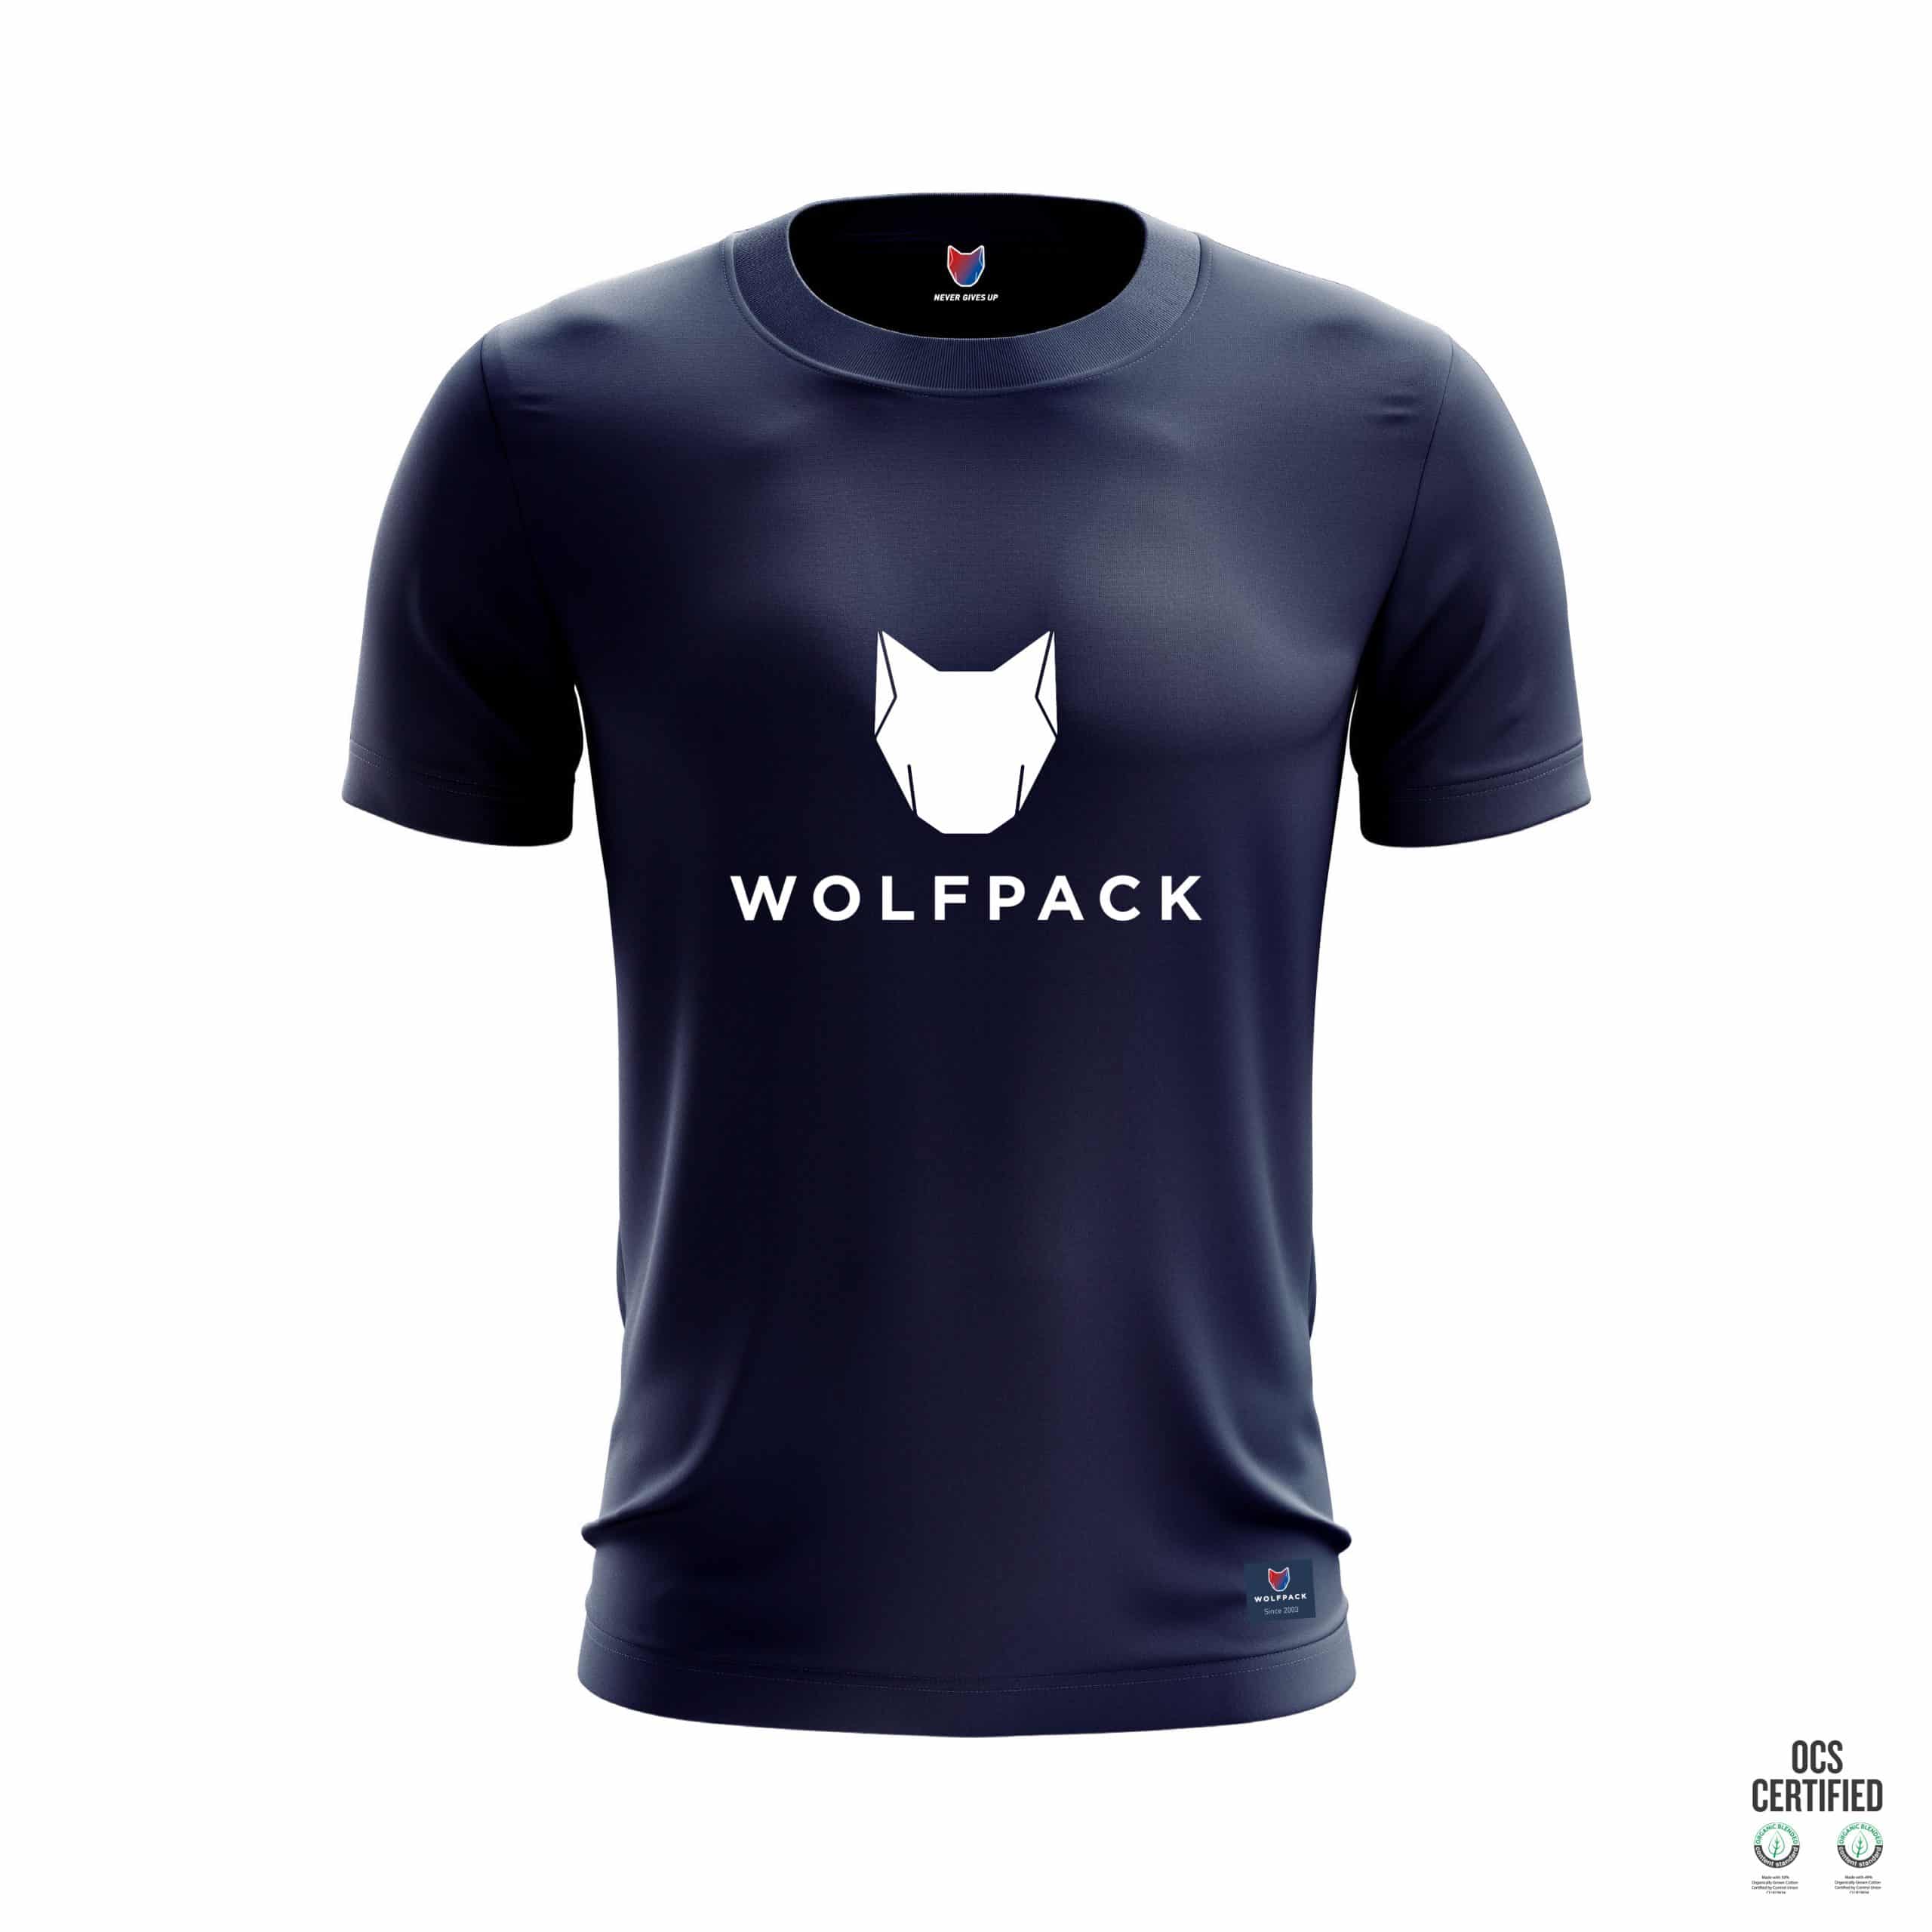 The Wolfpack Fashion T-Shirt - French Navy